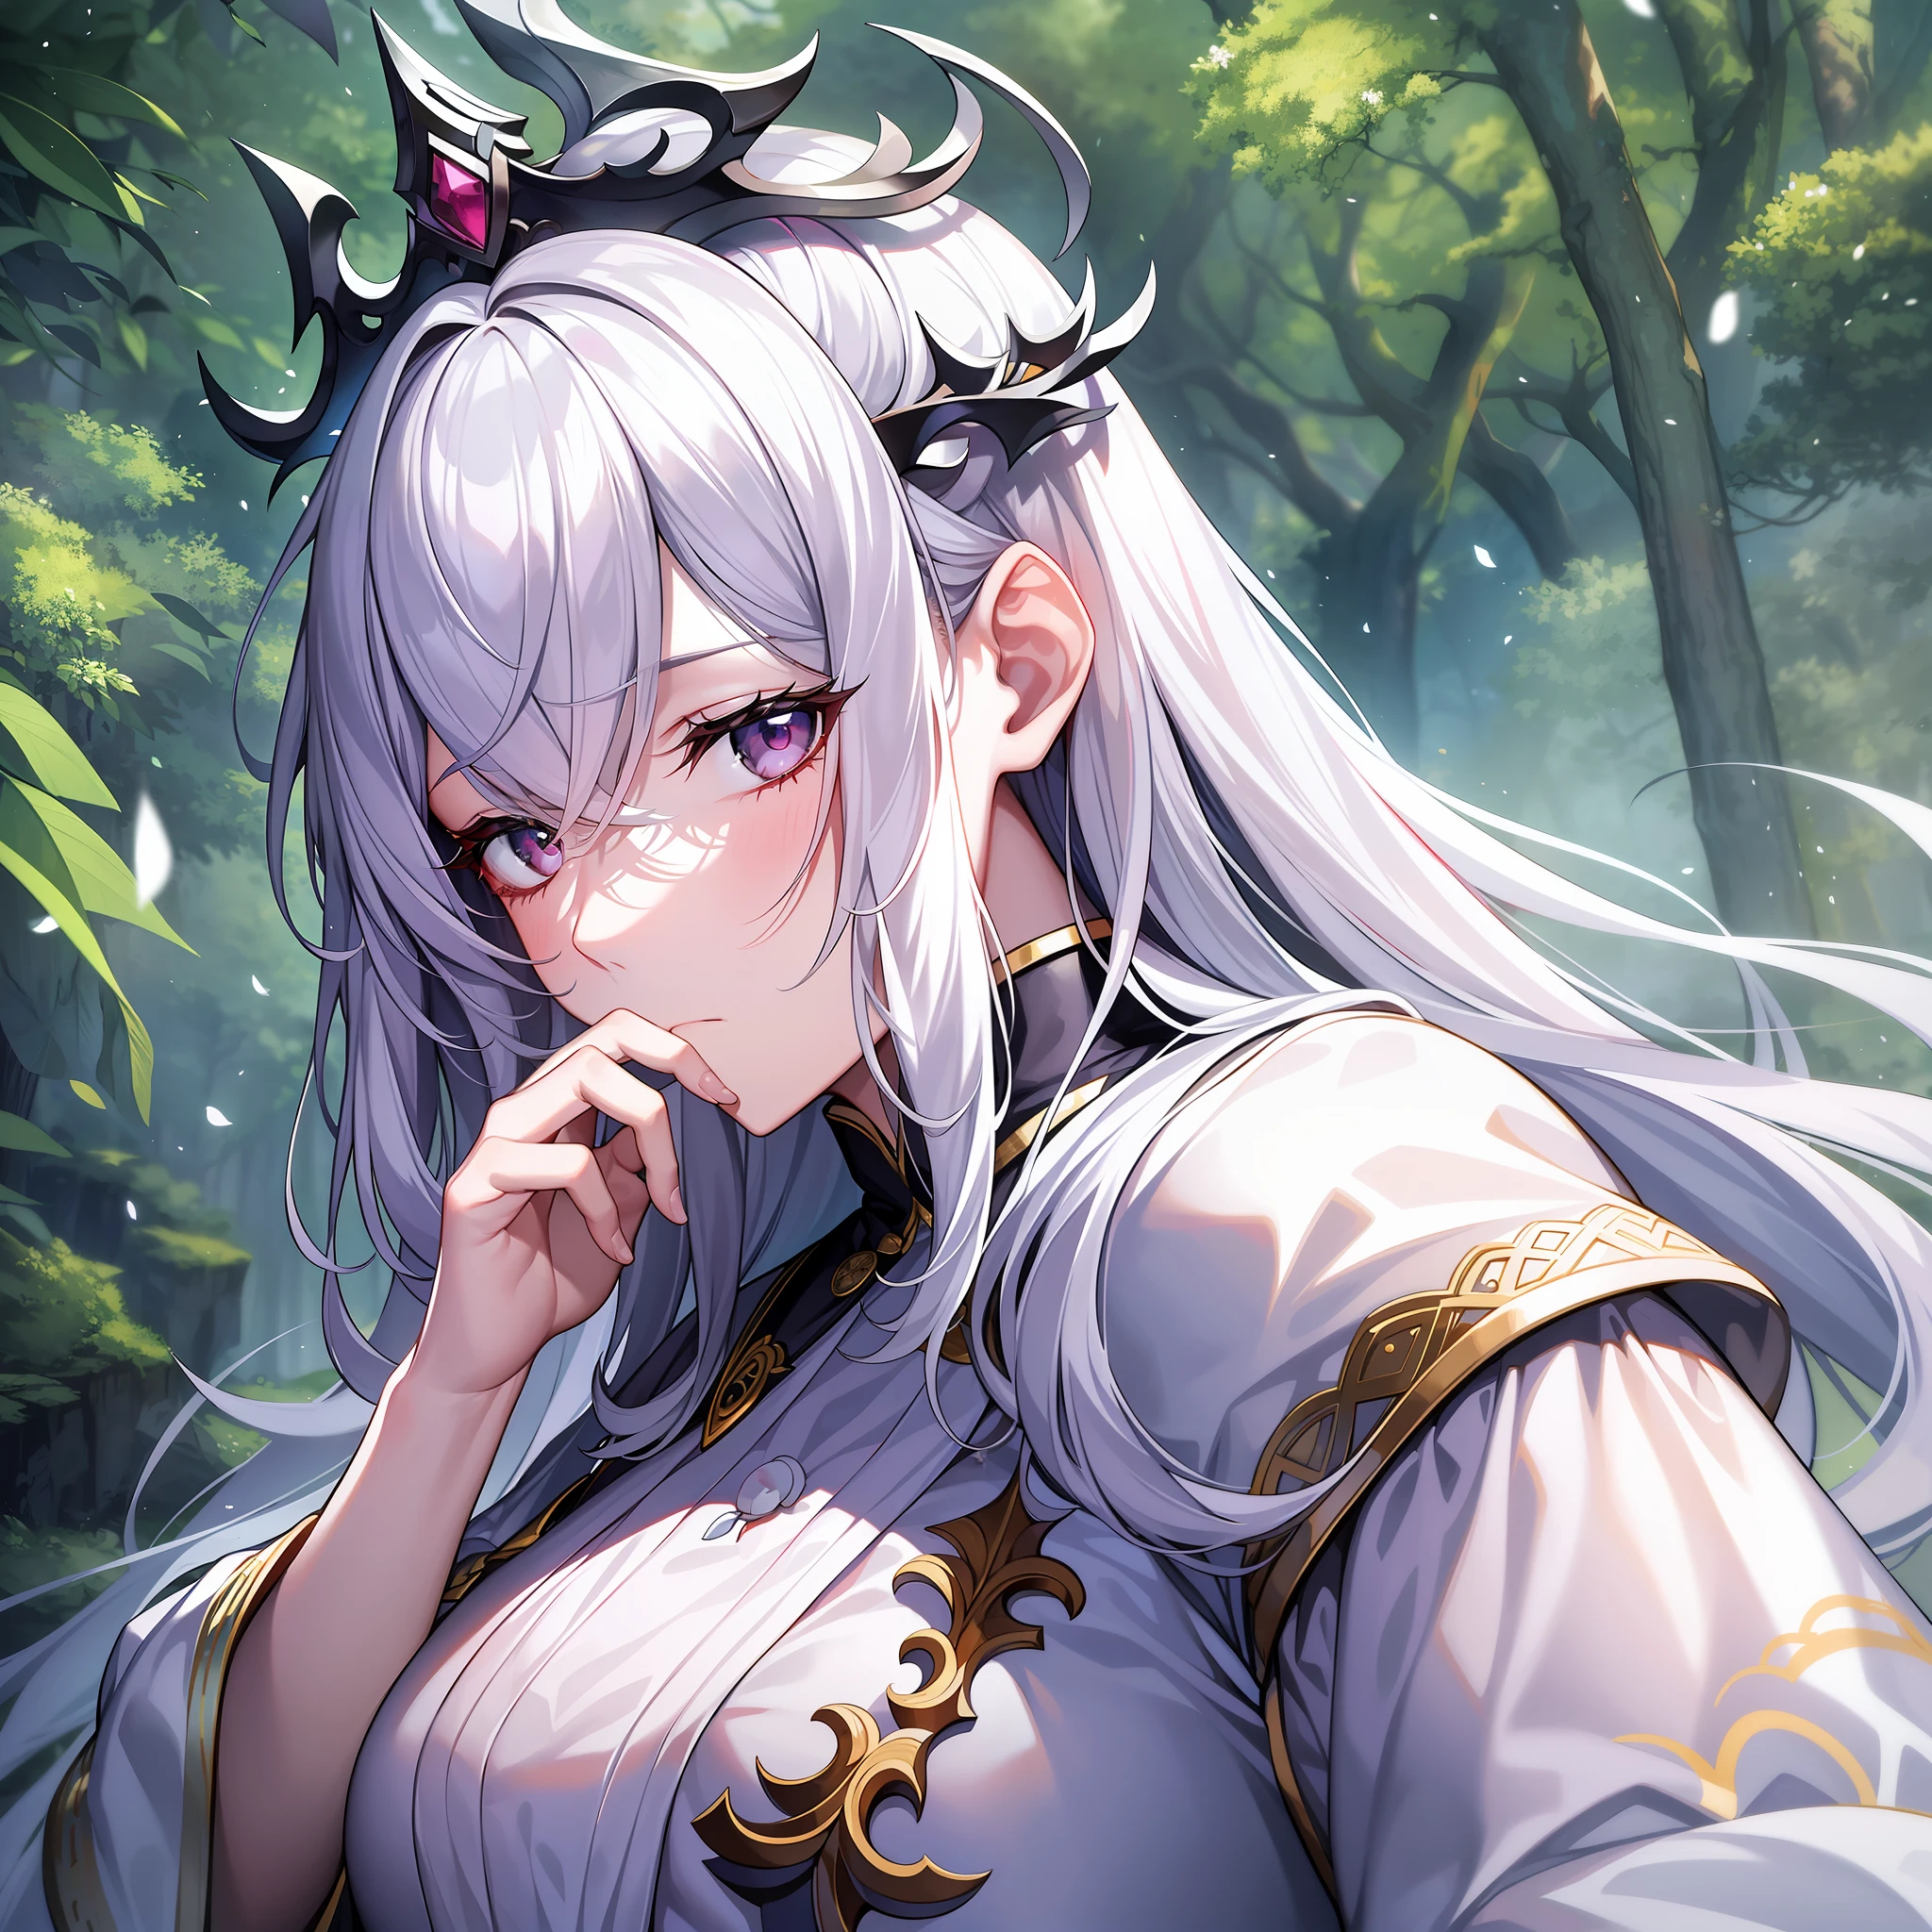 In this forest full of magic，A white-haired female emperor of the white fox tribe who is biting her finger appears in the center of the picture。

She wore a gorgeous white dress，Wear a sumptuous crown。She held a wand aloft，But he was a little upset and bit his index finger with his other hand，Frowning slightly，The gaze stared into the distance ahead。

The color tone of the whole picture is mainly white，It creates a fantastic atmosphere。The background is an exotic forest，The setting is peaceful and peaceful，But the female emperor's expression was very uneasy。

This female emperor through her expressions and body language，Exhibits a sense of self-control and anxiety。She was reluctant to let her emotions influence her demeanor and actions，But her fingers revealed her unease。She seemed to be thinking about something，But the difficulties she faced seemed to make her feel very troubled and irritated。

The whole picture conveys an atmosphere of mystery and dreaminess，It also shows the vulnerability and effort that women politicians face in such a stressful situation。The emperor makes viewers feel her loneliness as a ruler、Boring，At the same time, it also shows that she is in power at the same time，The costs and challenges involved。